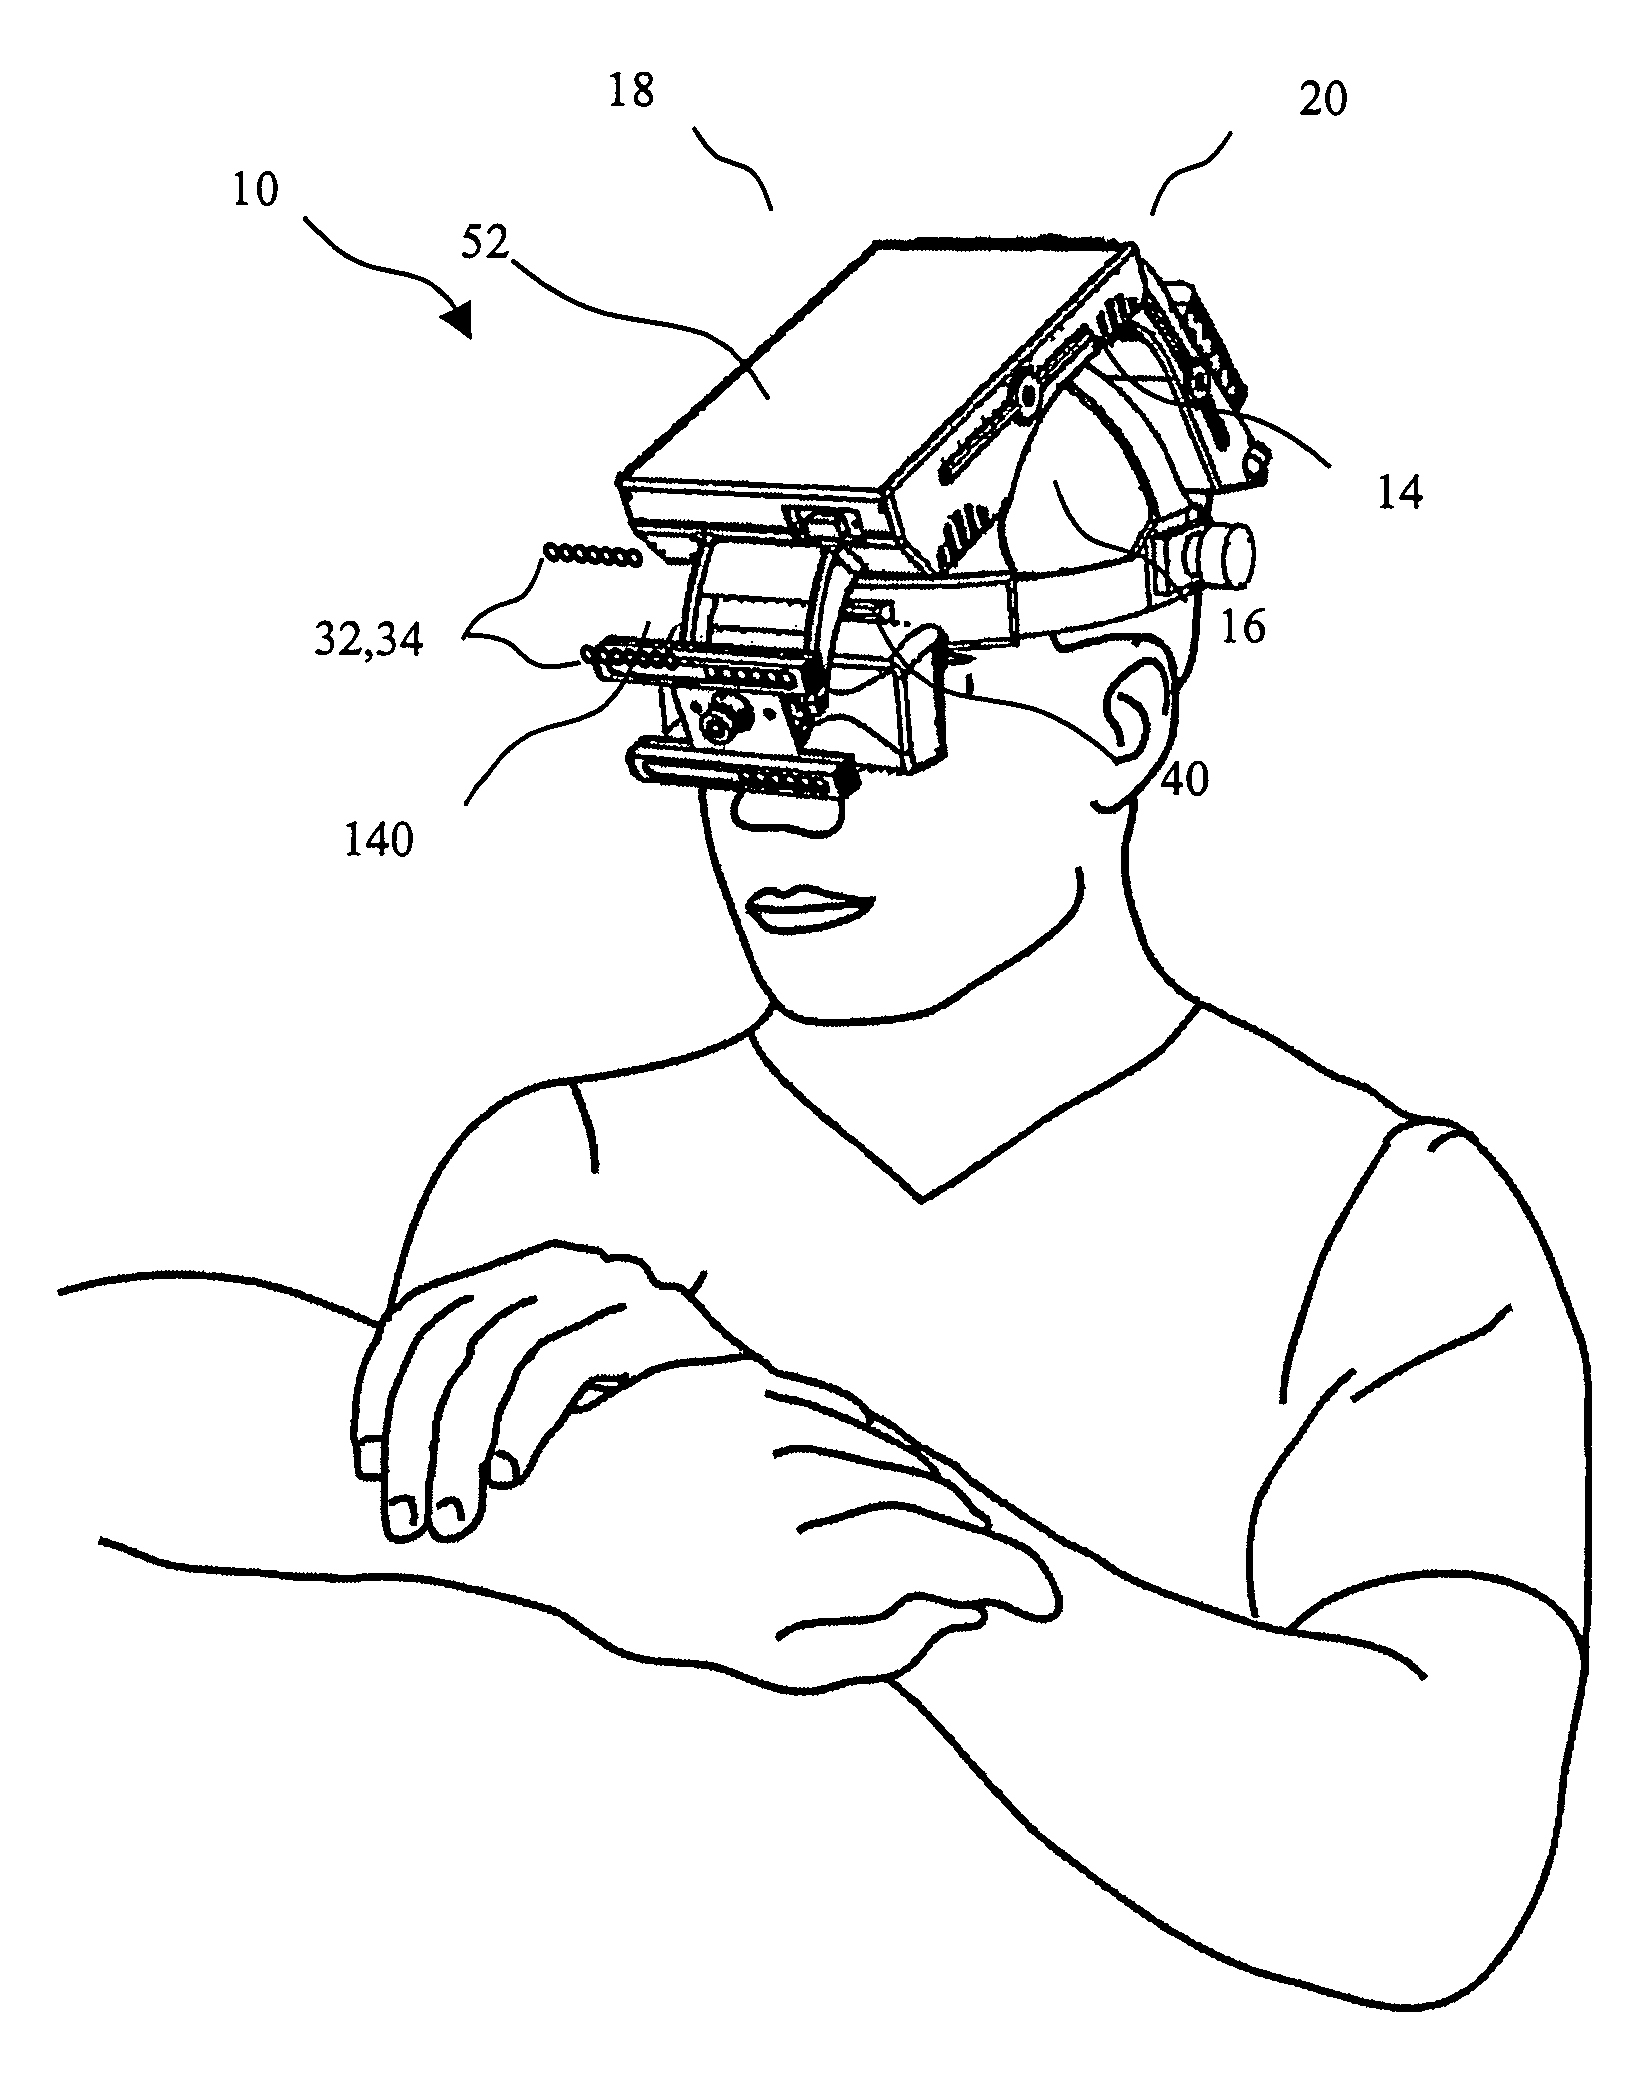 System and method for locating and accessing a blood vessel